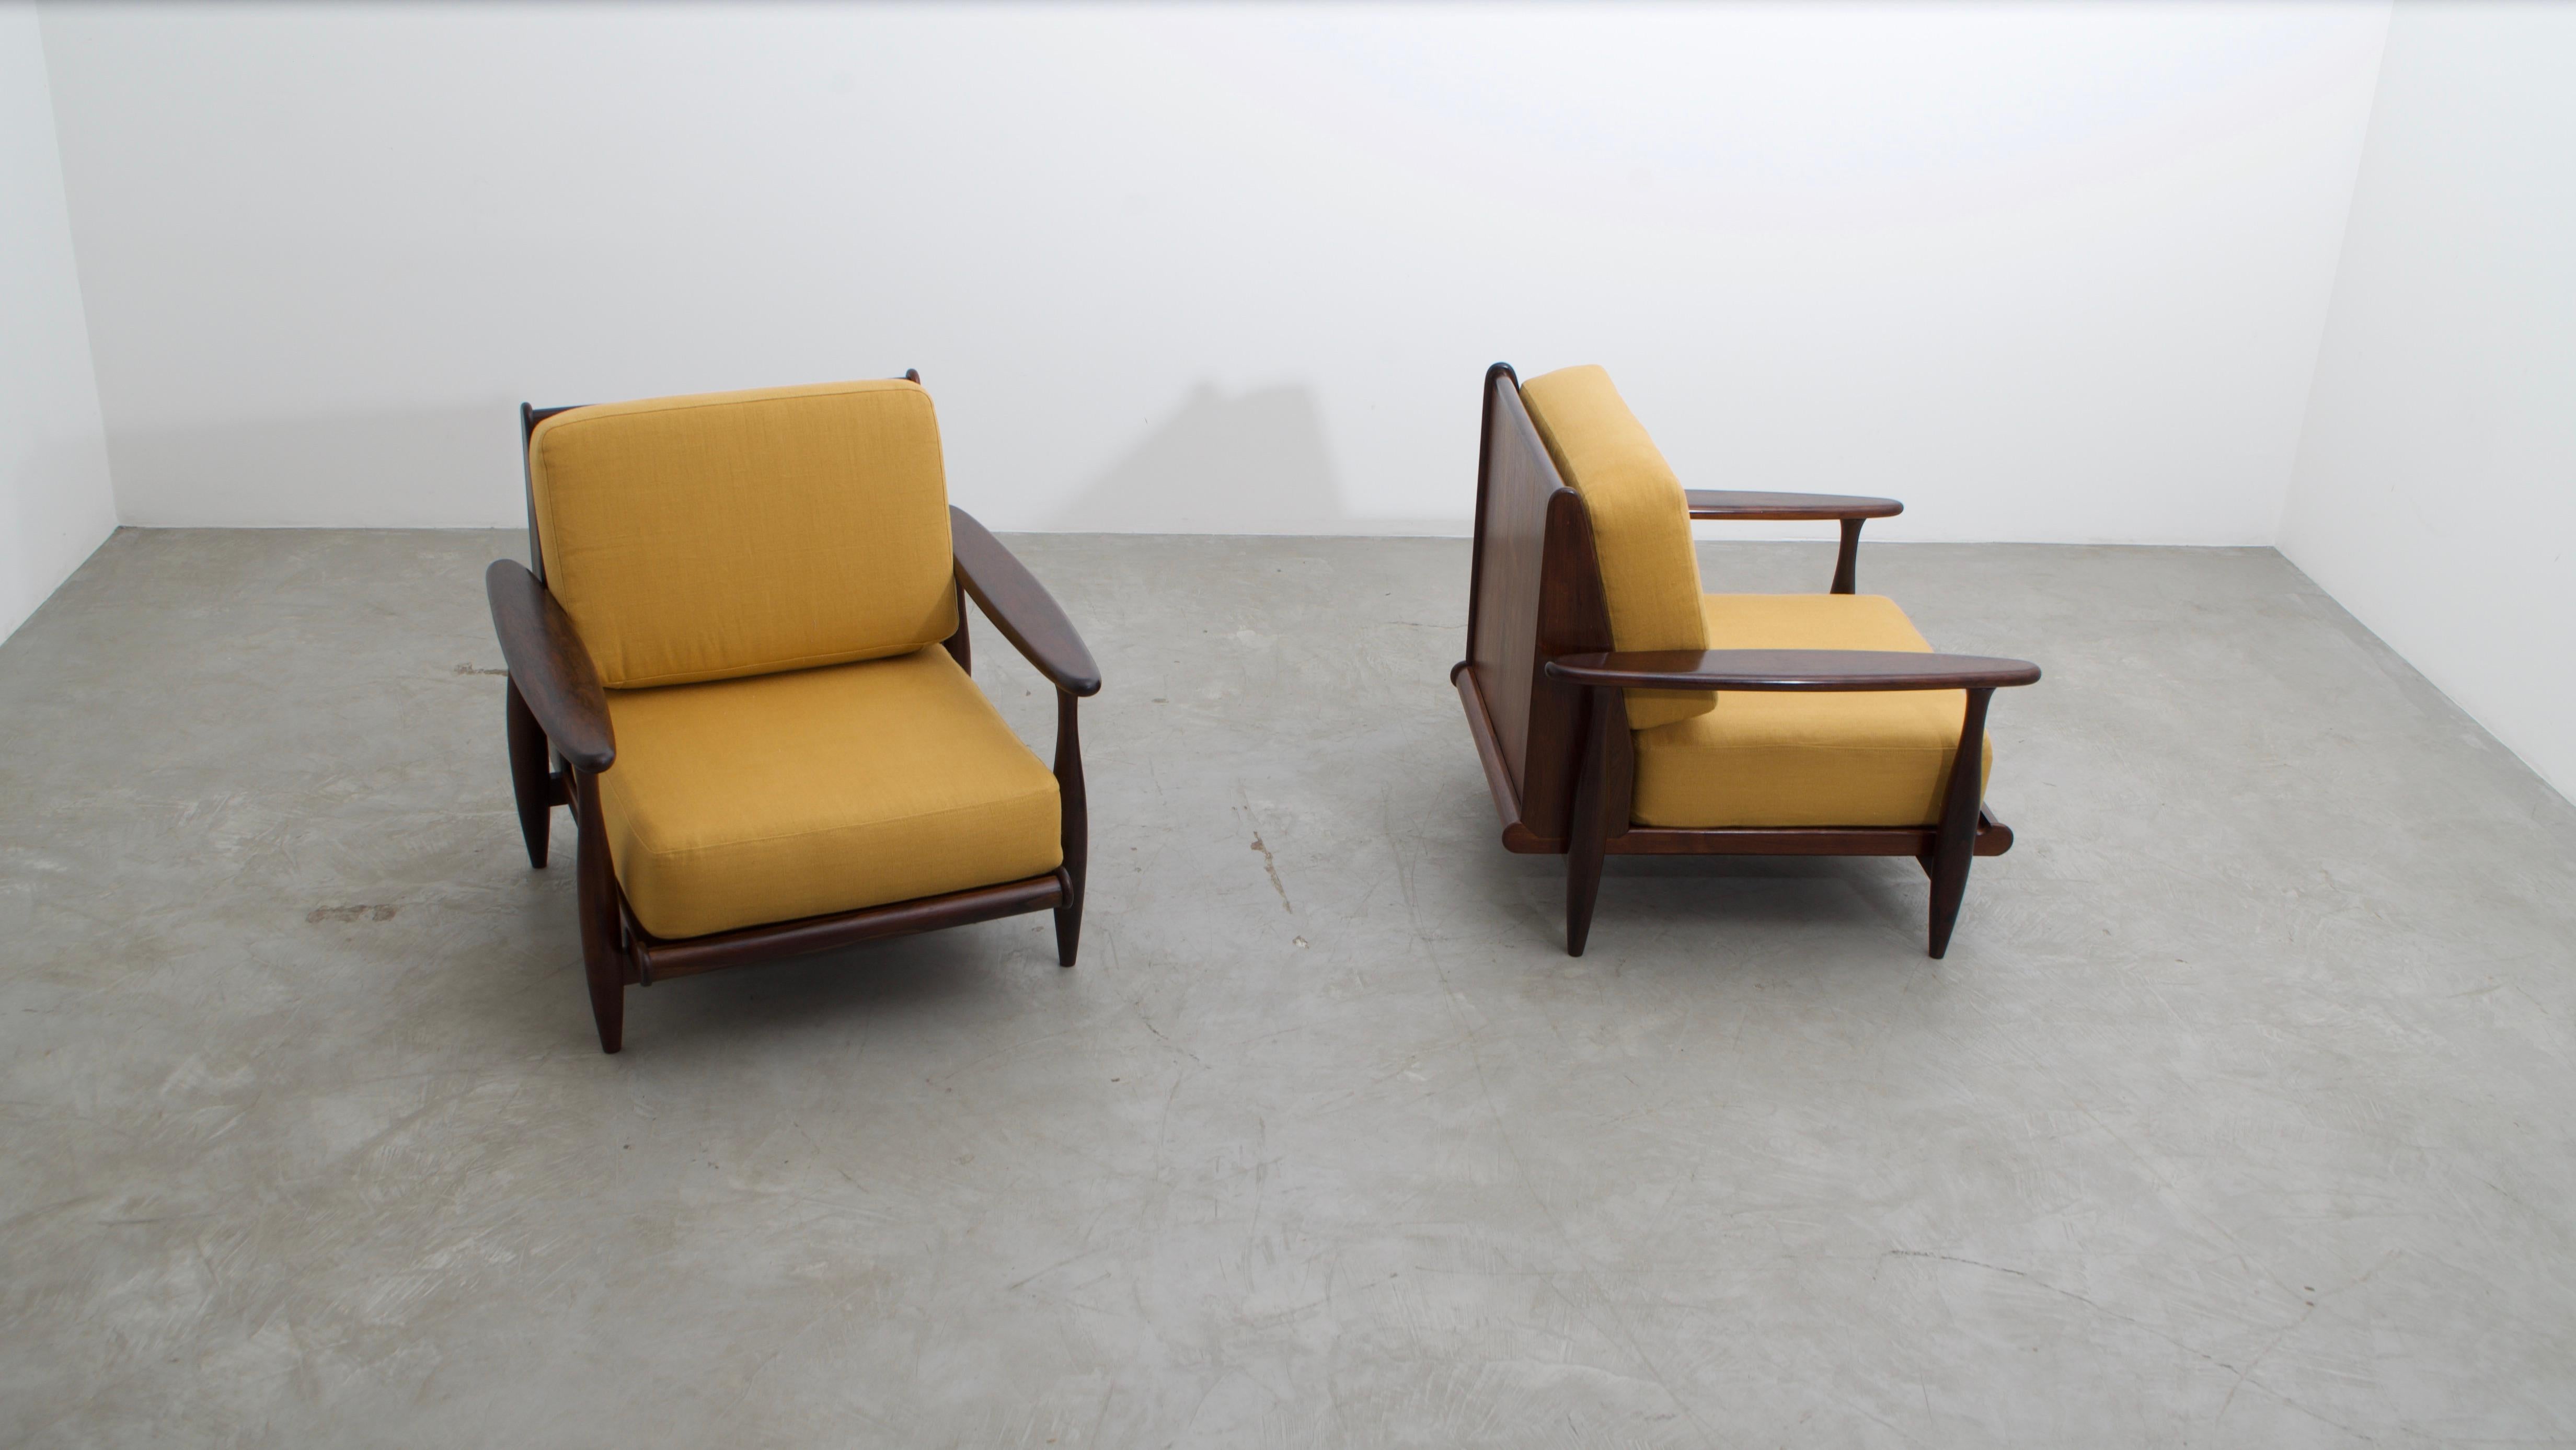 Pair of Lounge Chairs by Liceu de Artes e Ofícios, 1960's, Brazilian Mid-Century For Sale 4